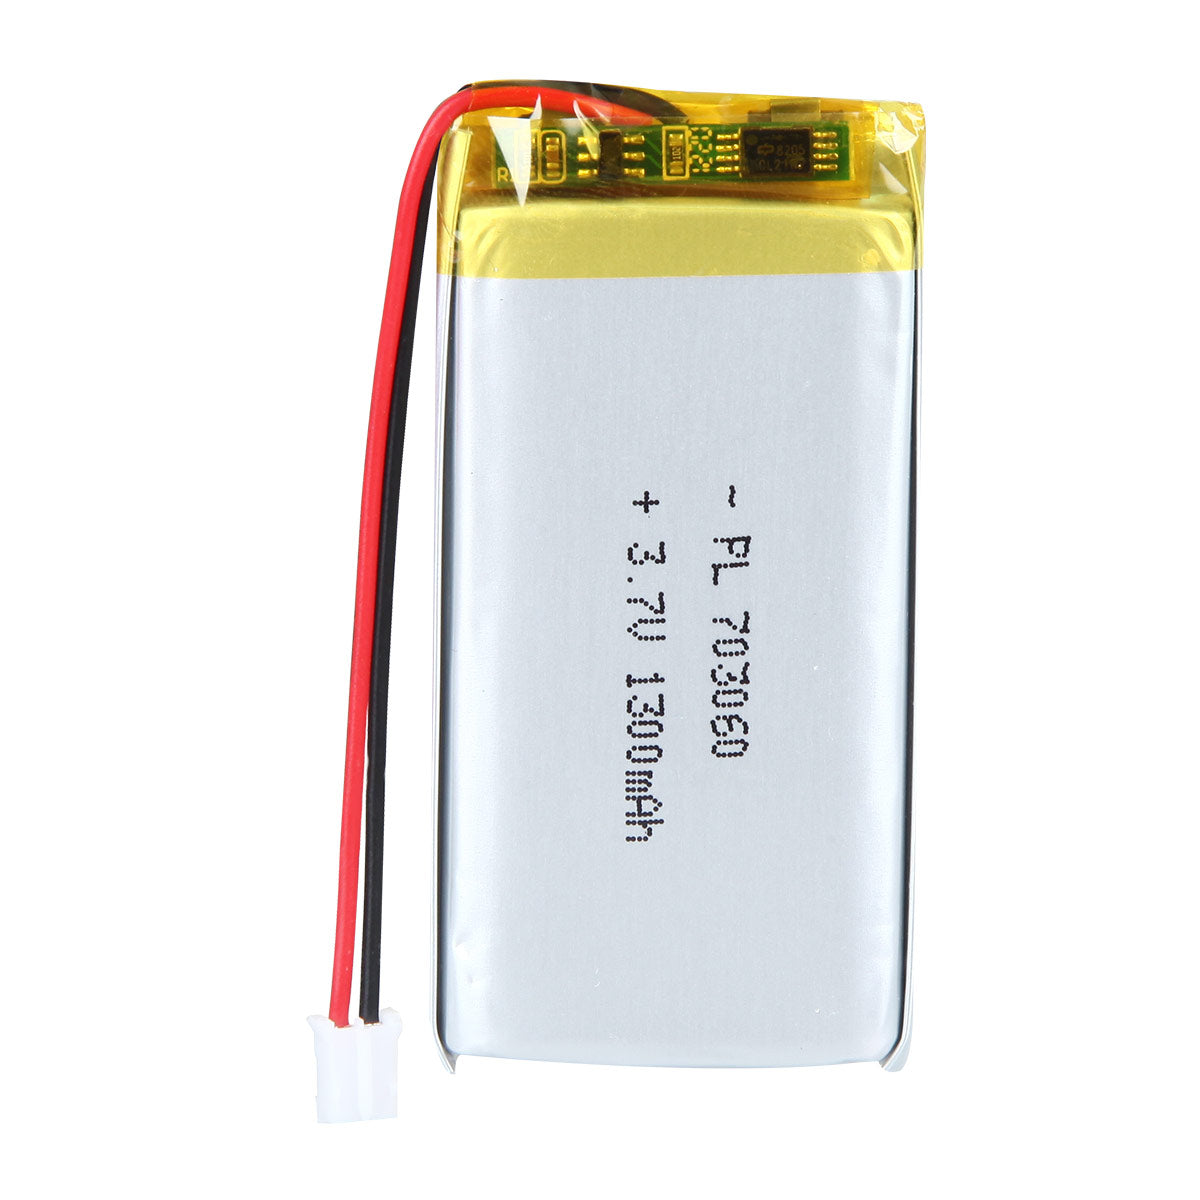 YDL 3.7V 1300mAh 703060 Rechargeable Lithium Polymer Battery